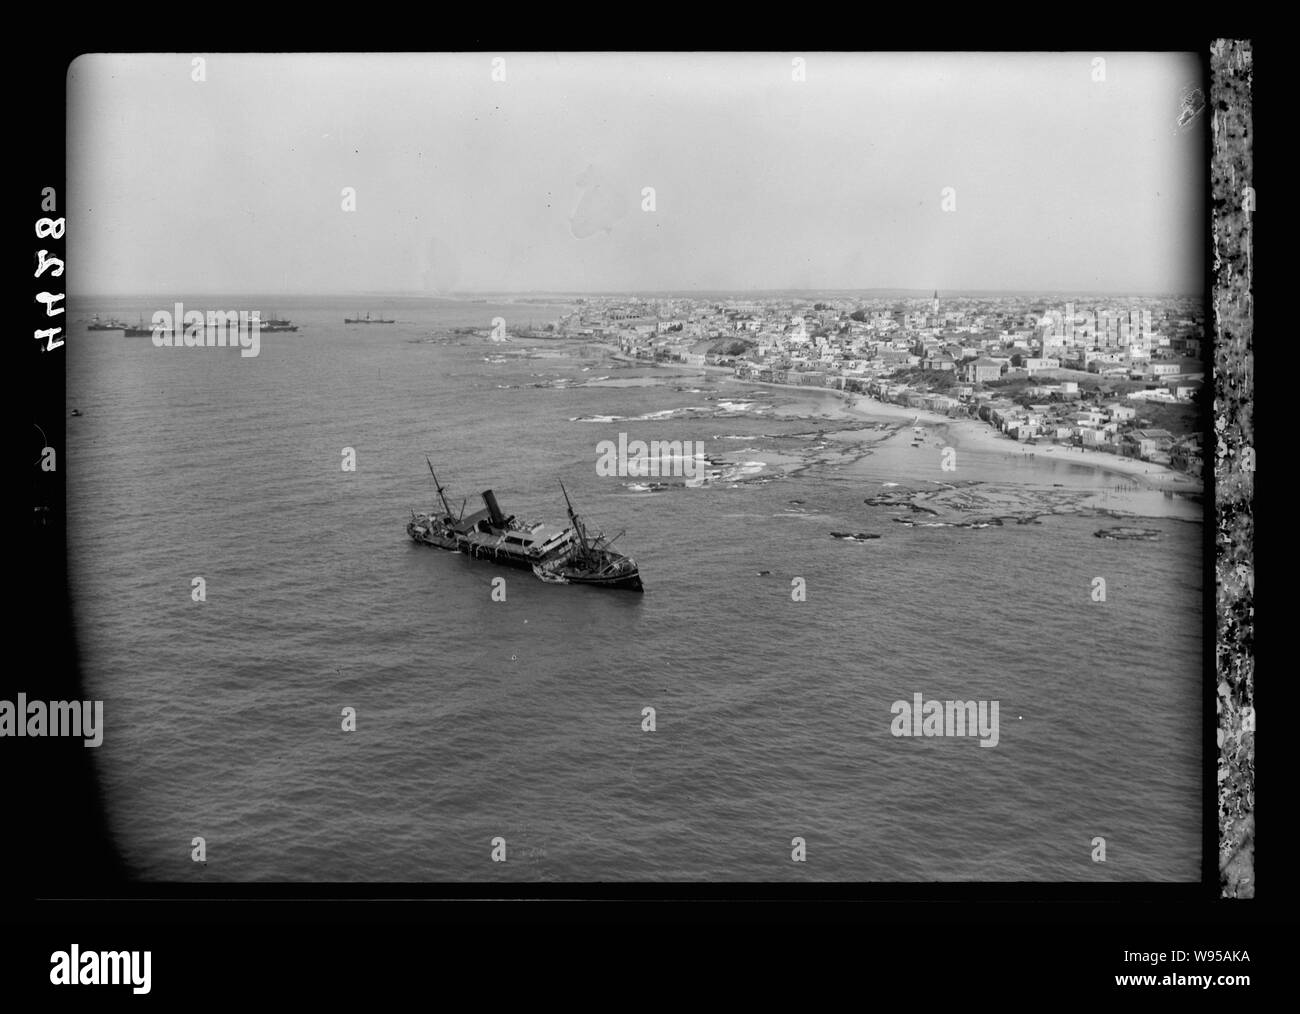 Air views of Palestine. Jaffa, Auji River and Levant Fair. Orange steamer grounded off Jaffa showing rocky coast Stock Photo